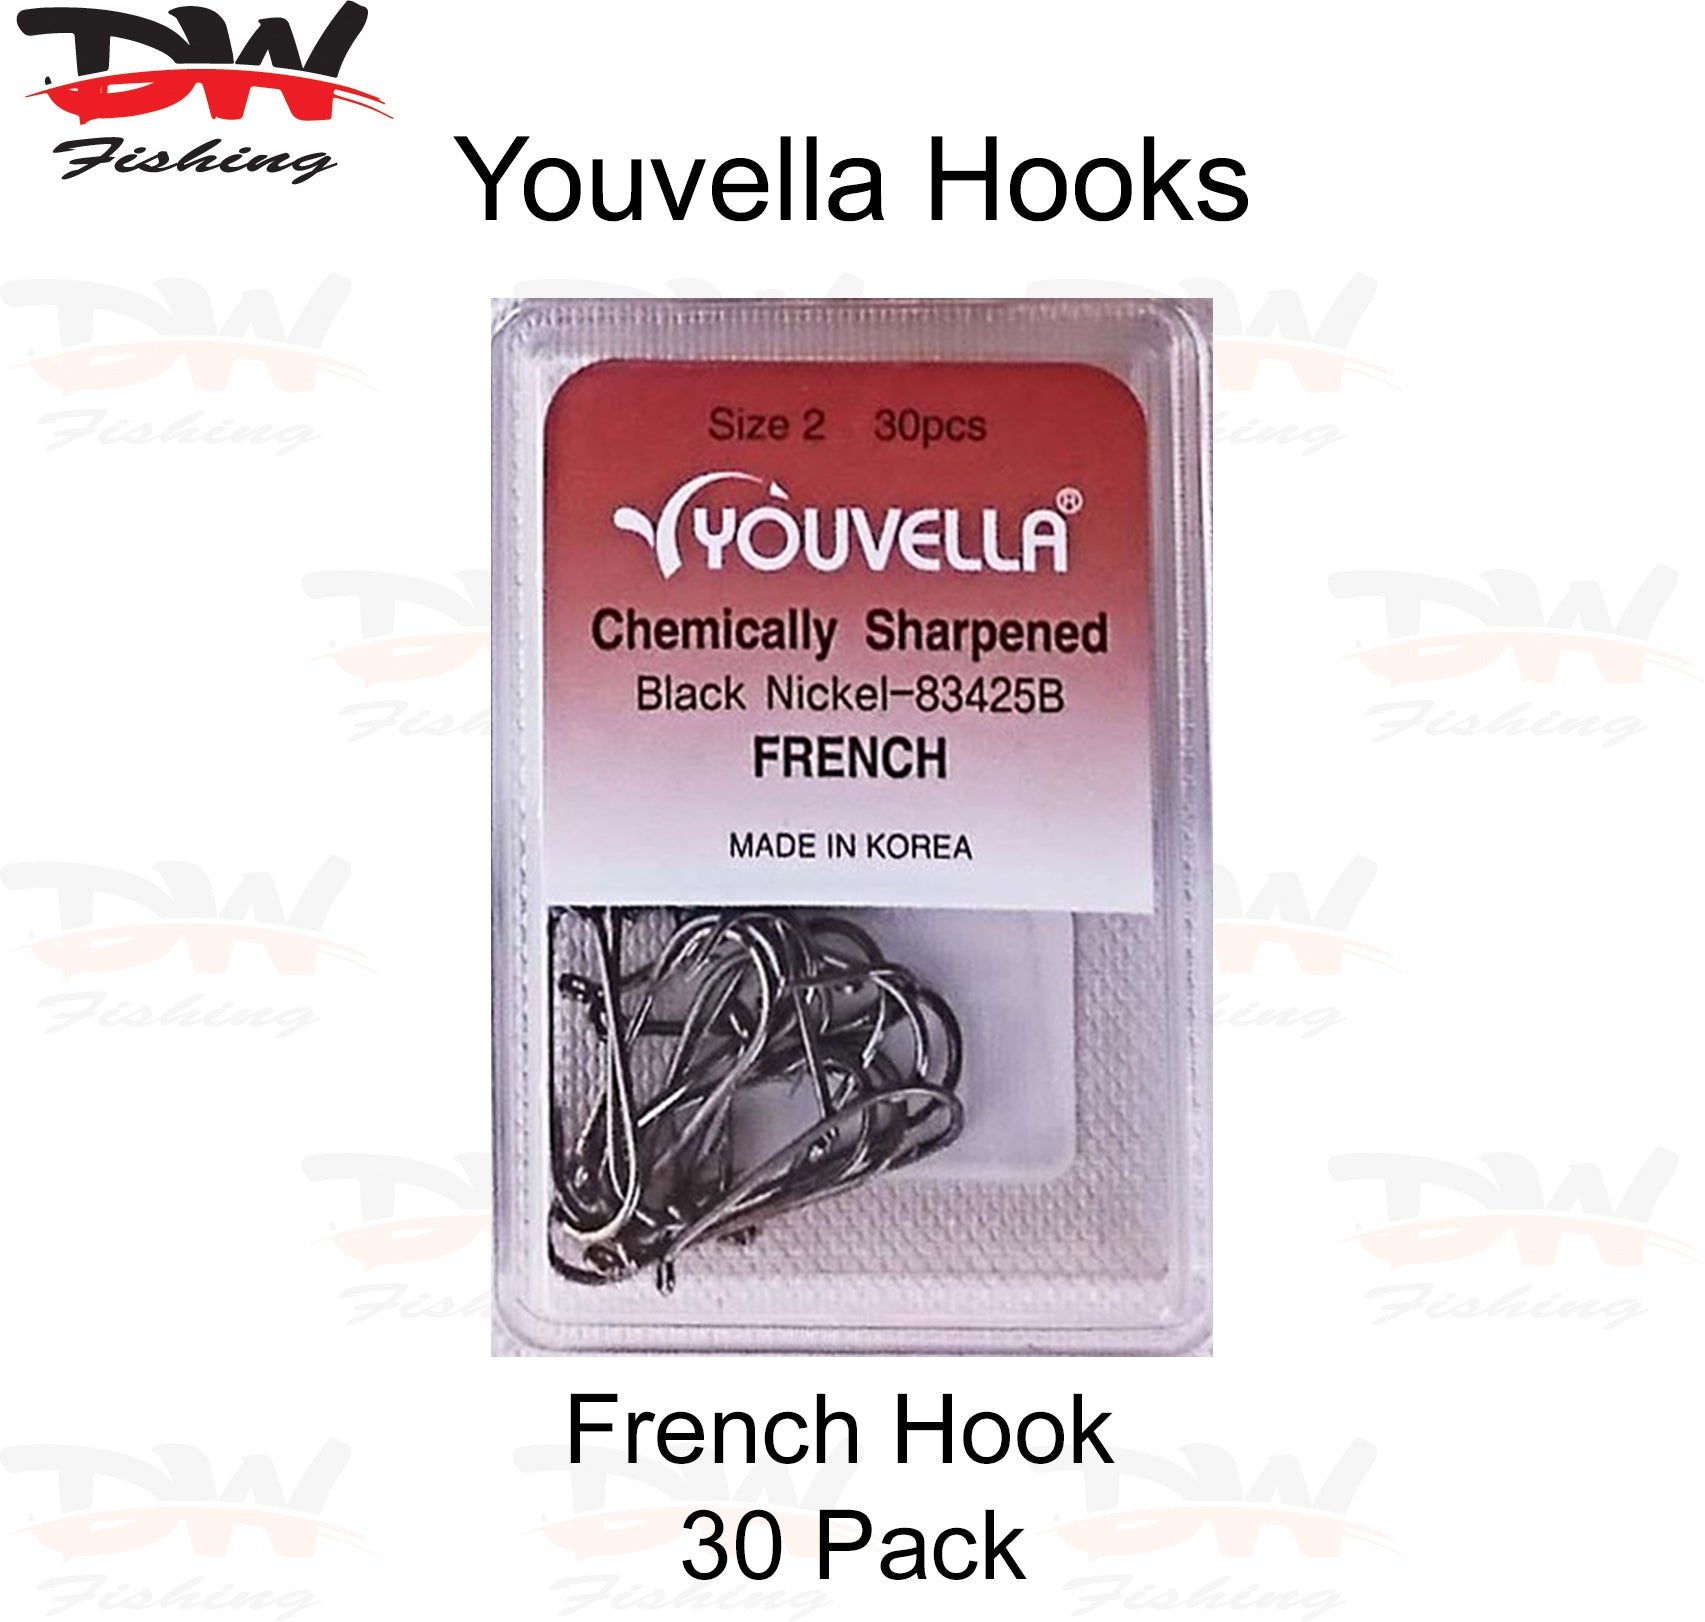 Youvella chemically sharpened French hook, 30 pack